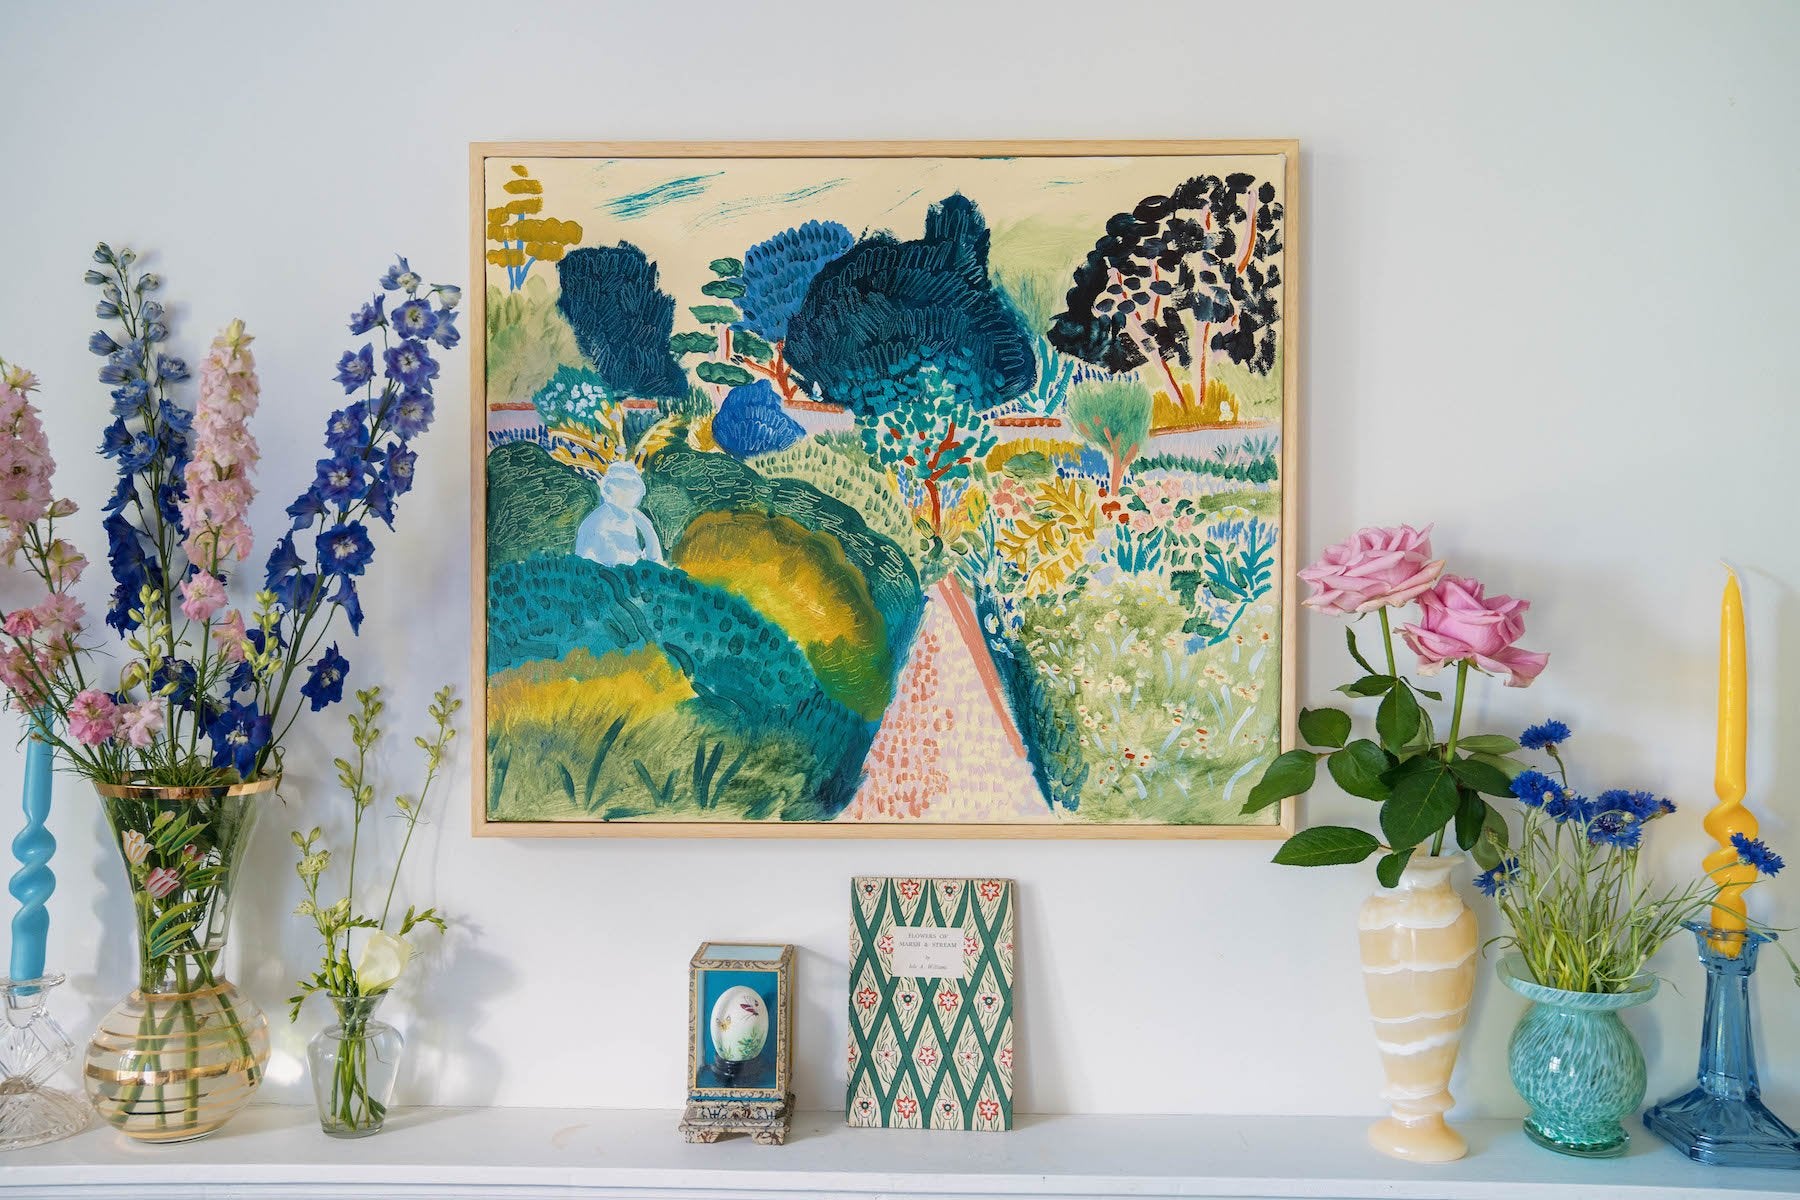 Bright and colourful original artwork on mantelpiece by Camilla Perkins.